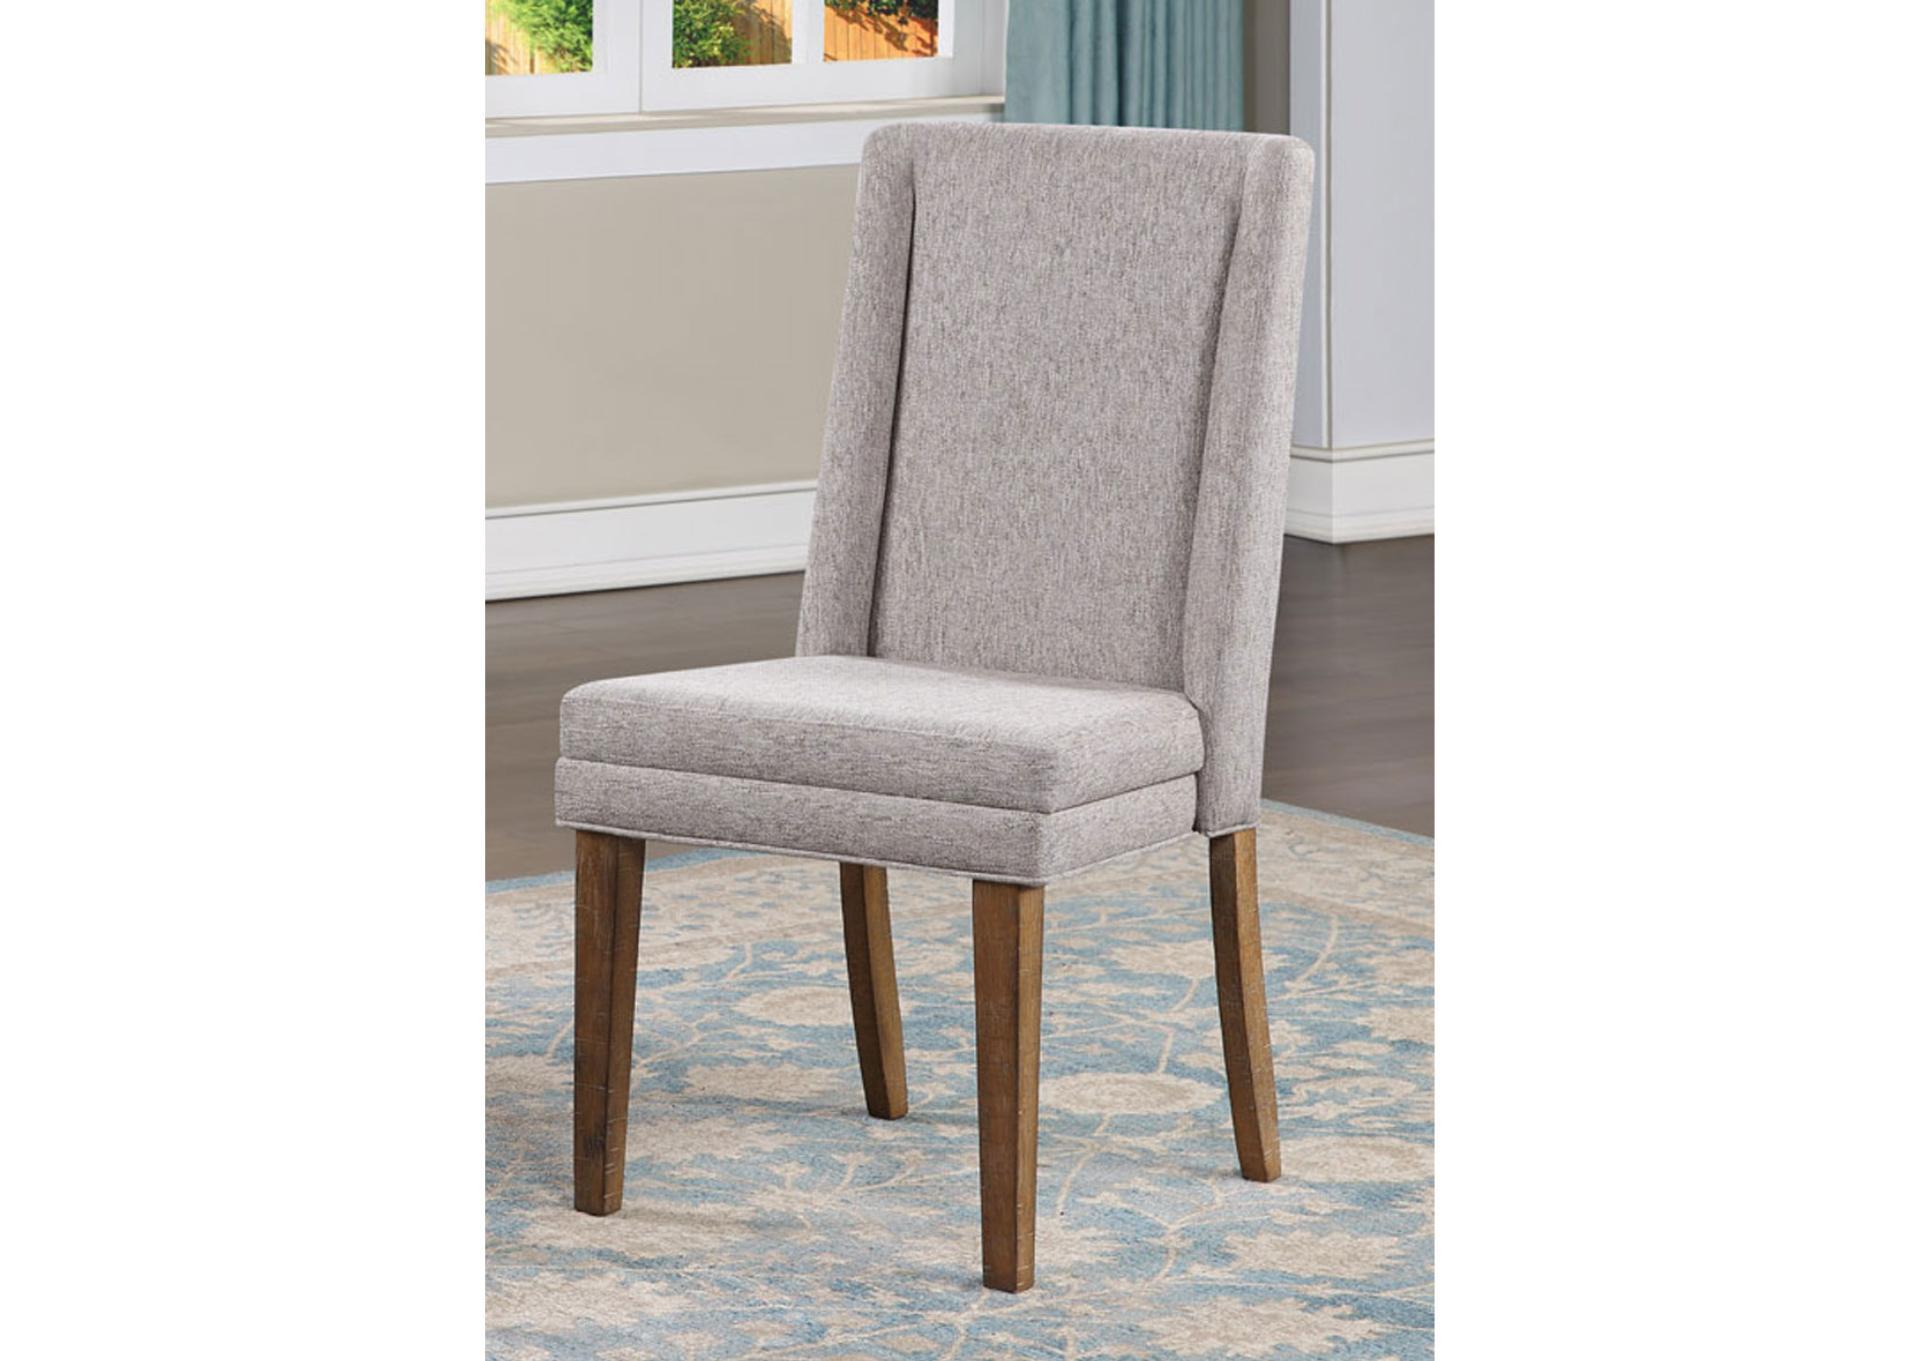 RIVERDALE UPHOLSTERED SIDE CHAIR,STEVE SILVER COMPANY